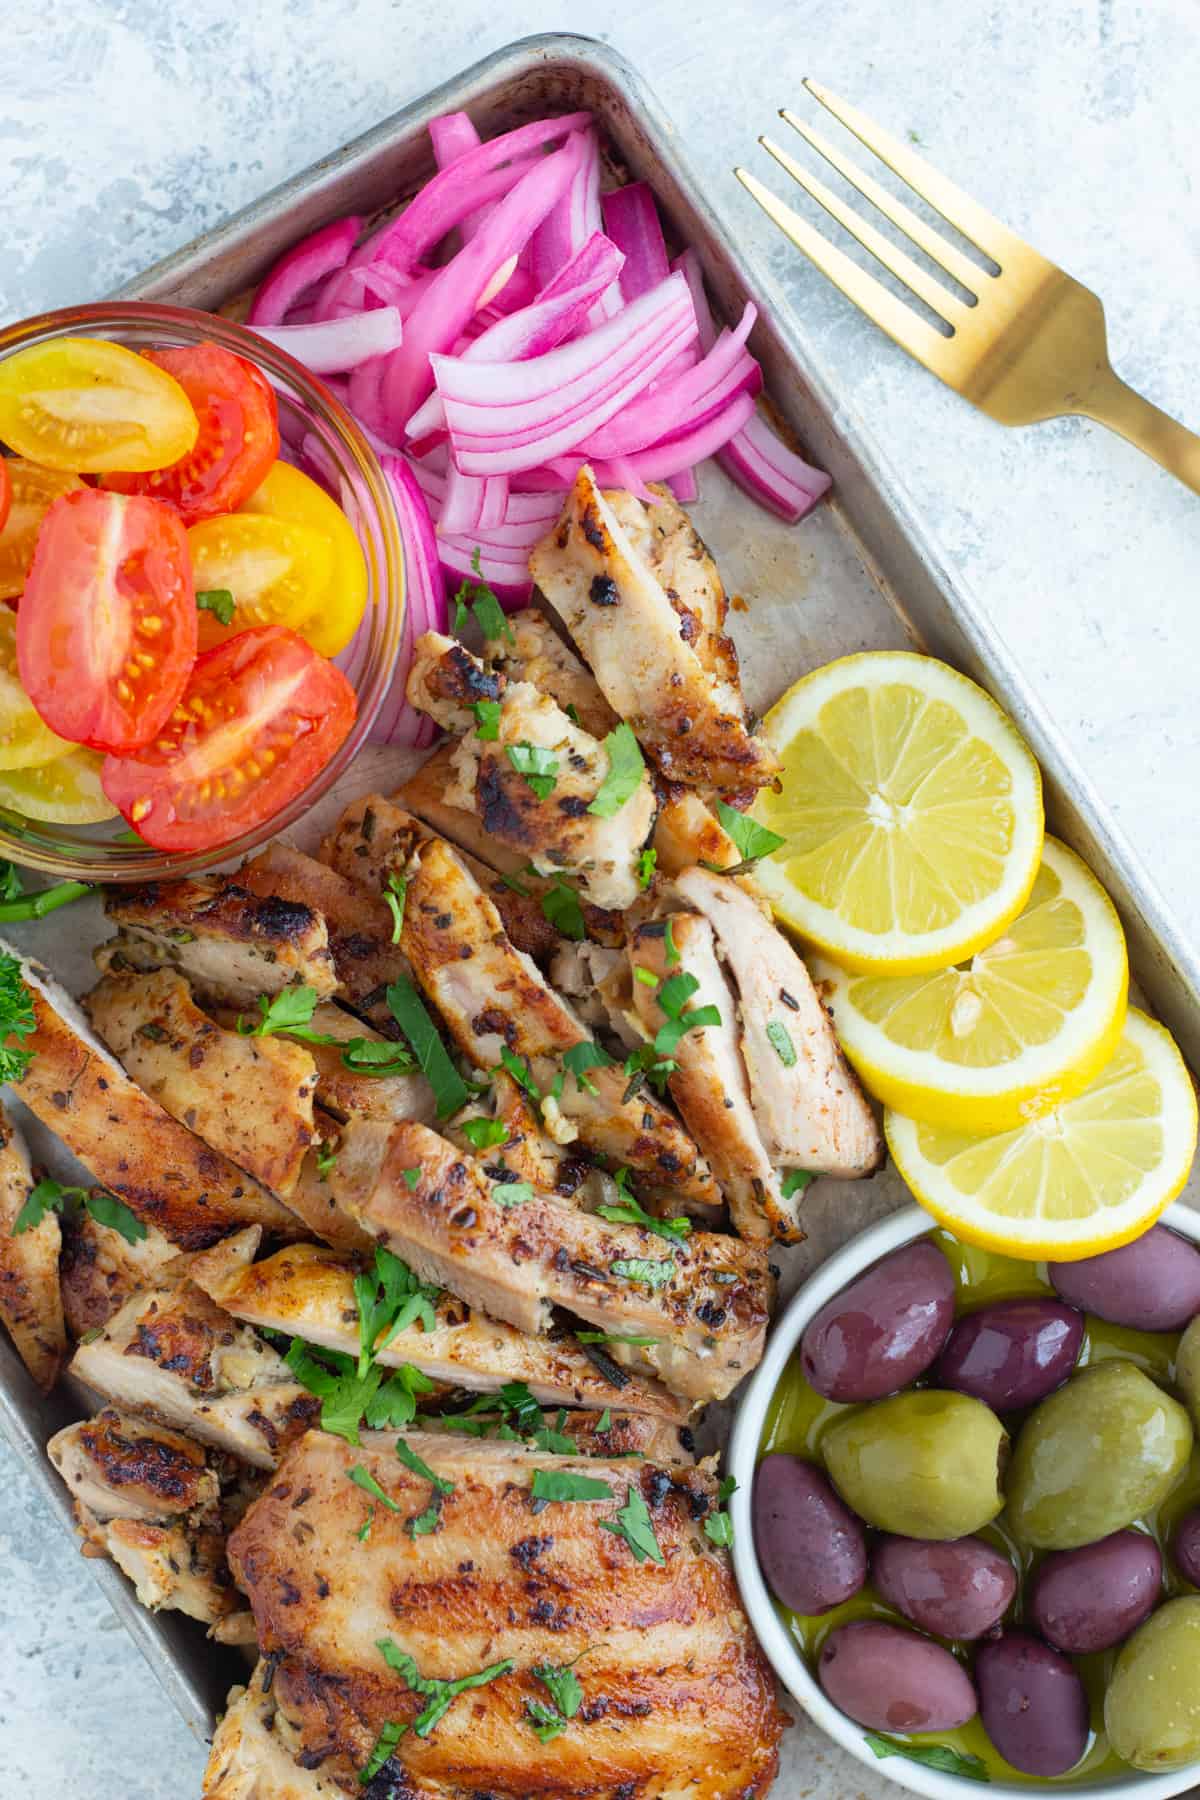 This Mediterranean style garlic chicken recipe is a keeper. Juicy chicken flavored with garlic and Mediterranean herbs is absolutely delicious.
